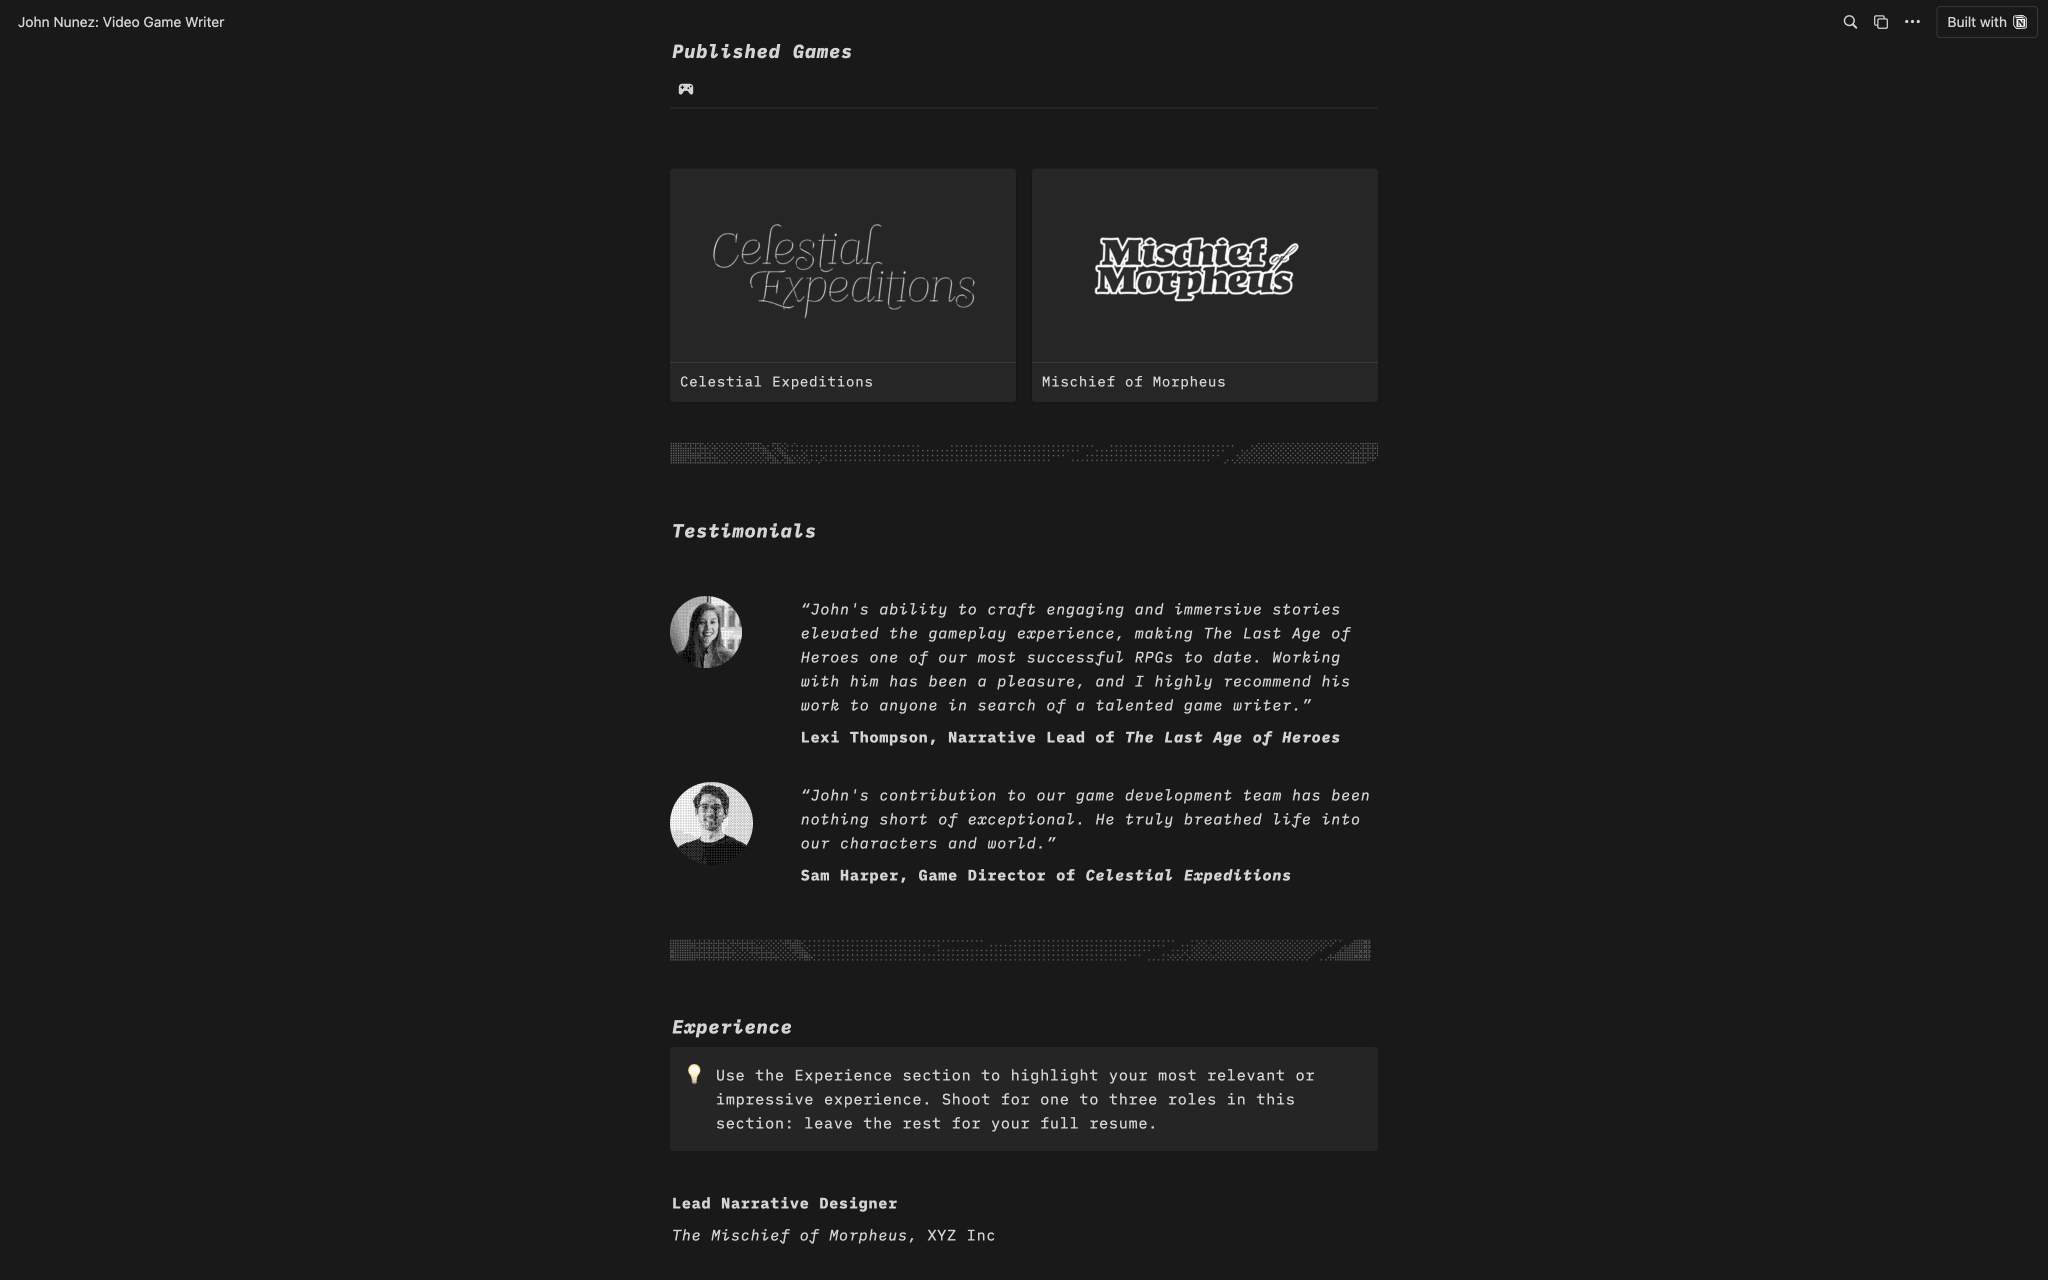 Get your writing portfolio online fast with this Notion site template. The Game Writer portfolio makes it easy to create a clean, professional-looking website to show off your writing samples and experience. No coding needed! 